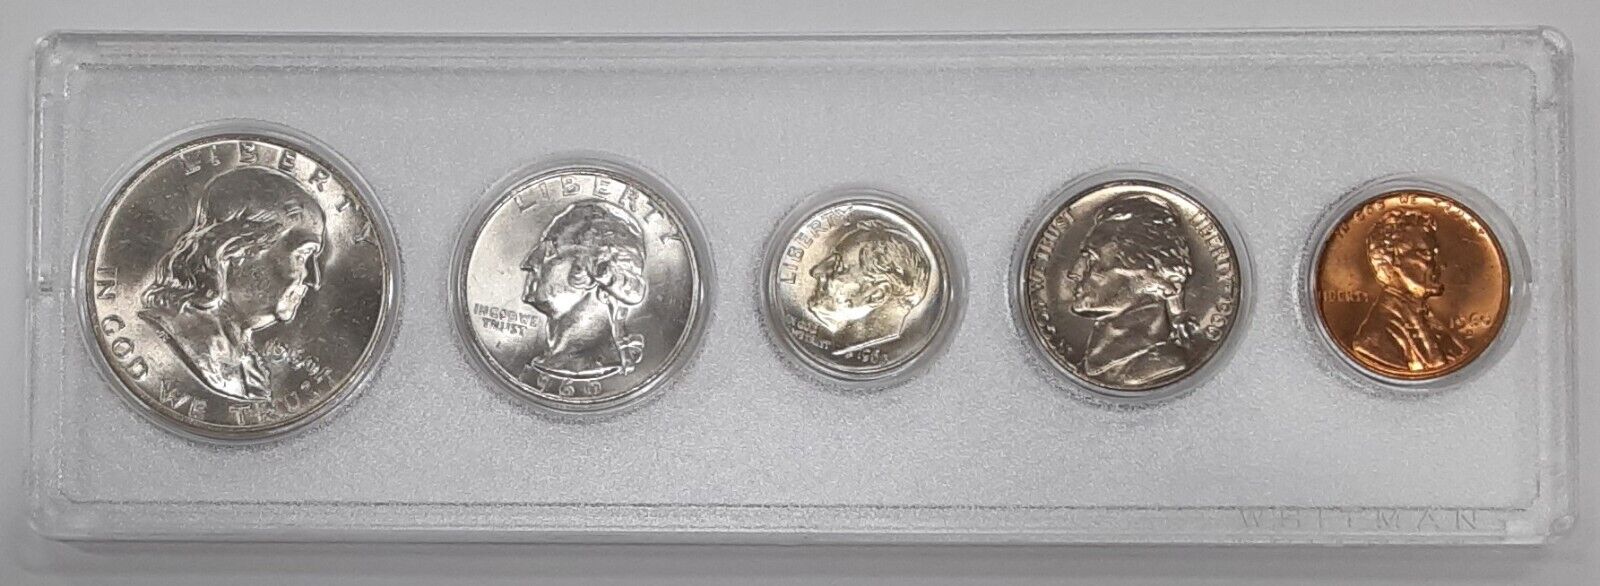 1960-D US Uncirculated Year Set with Silver Half Quarter and Dime 5 Coins Total